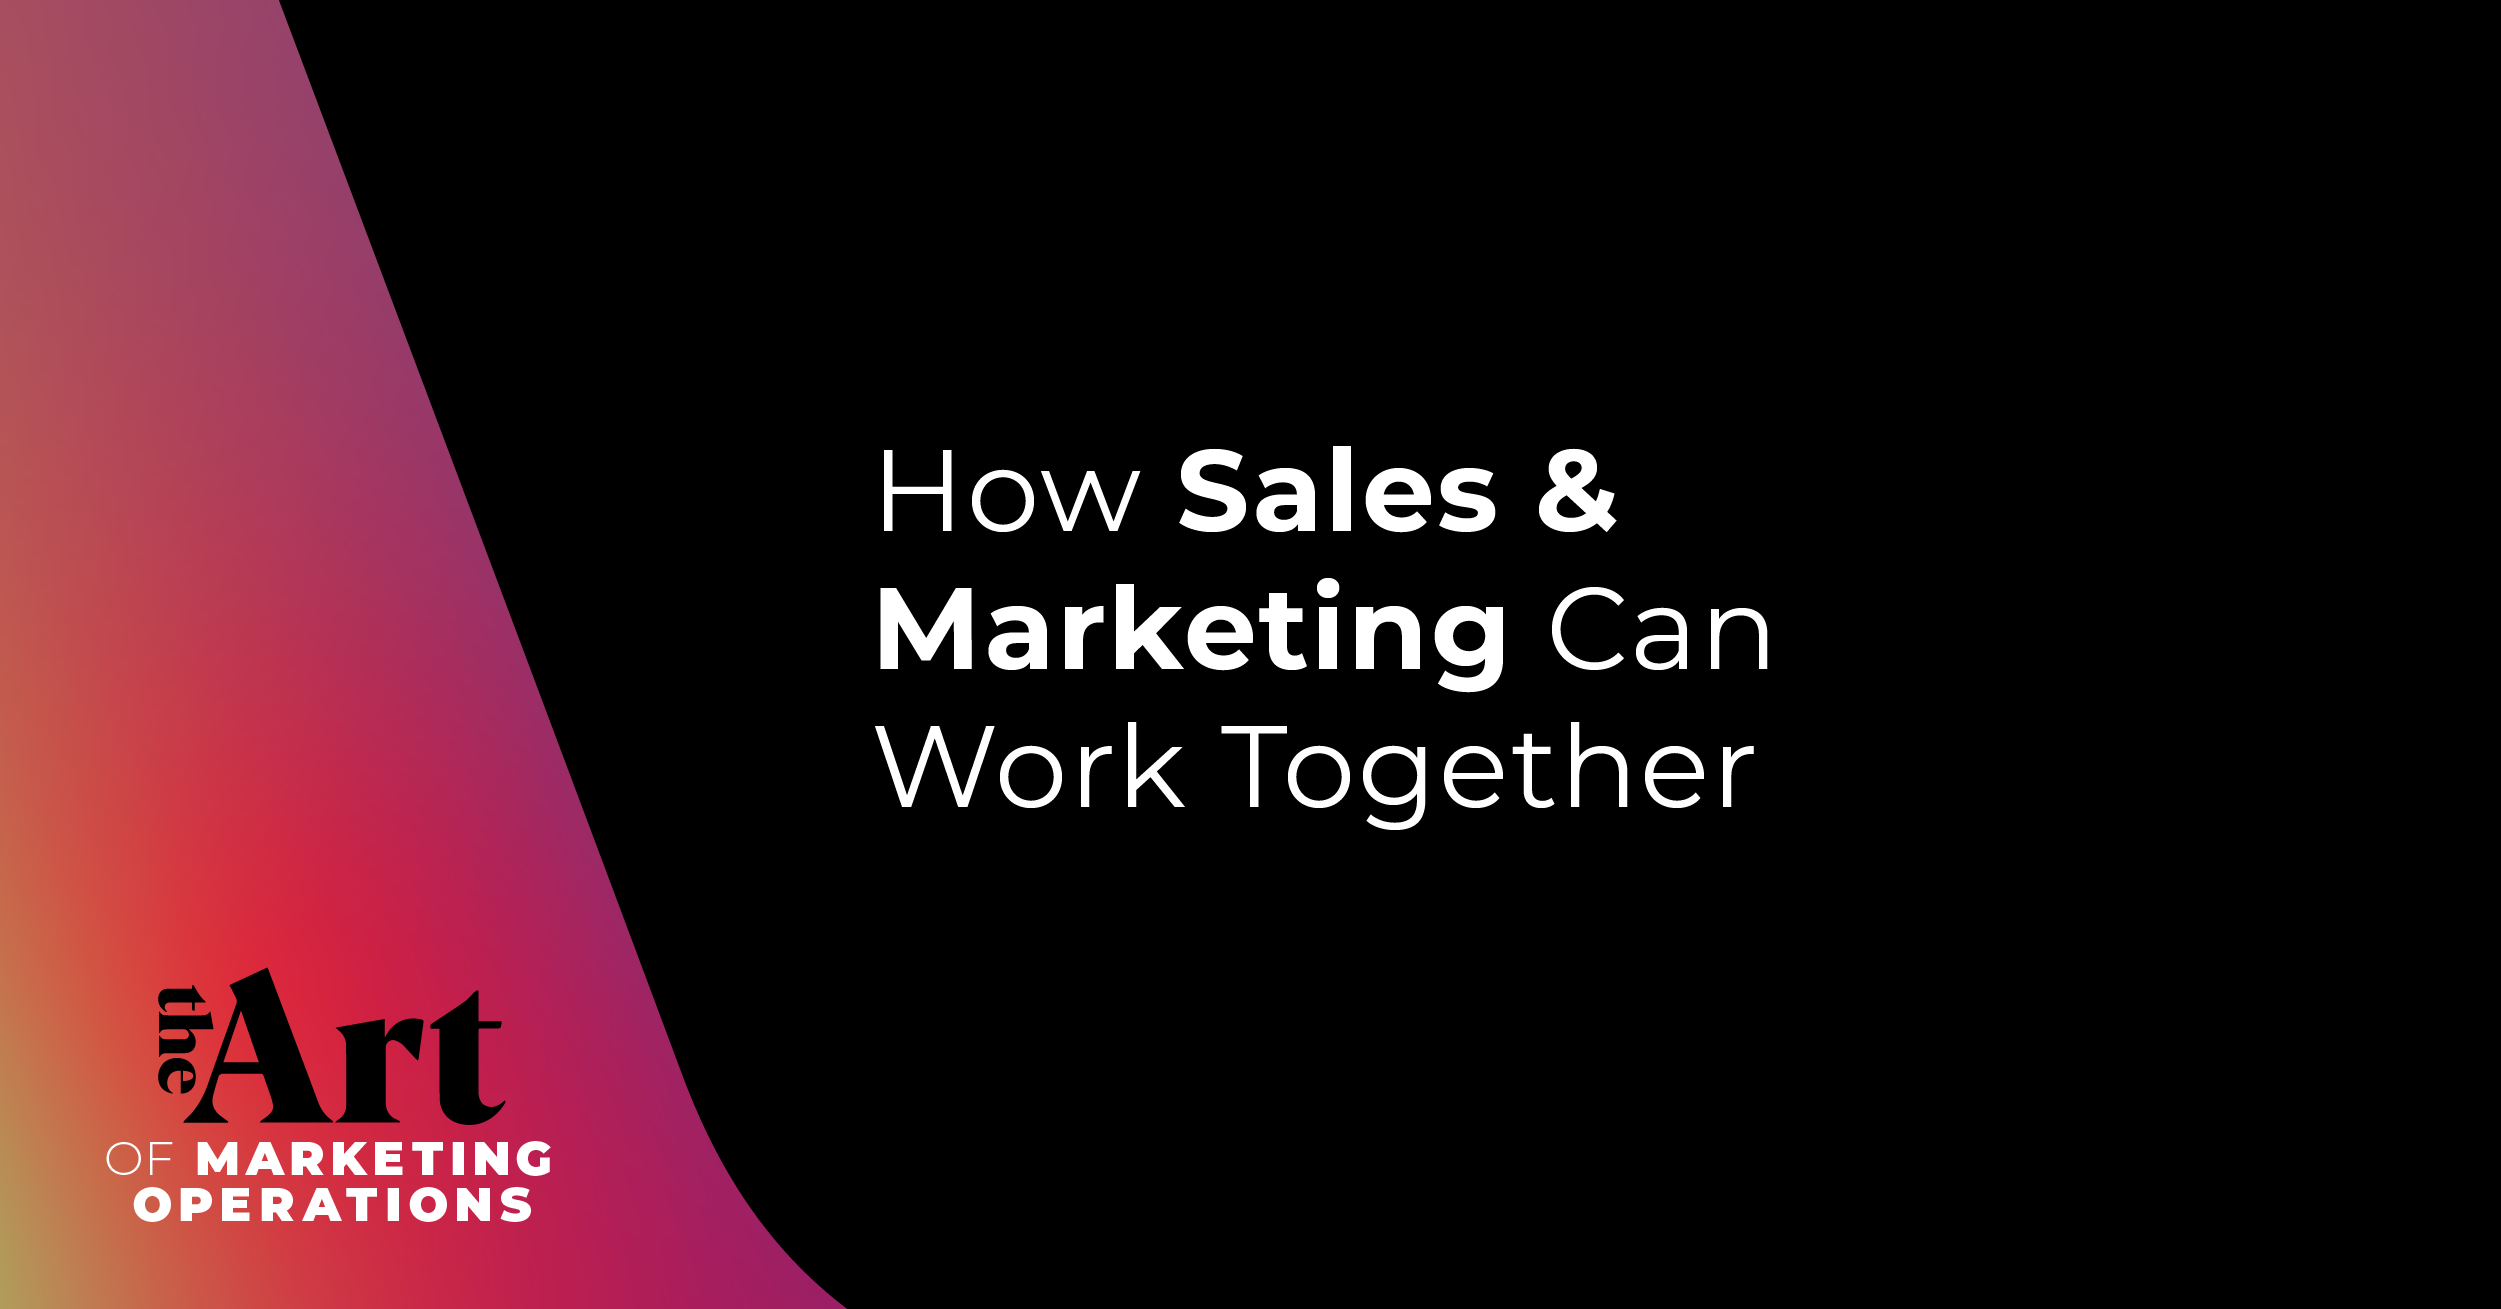 How Sales & Marketing Can Work Together